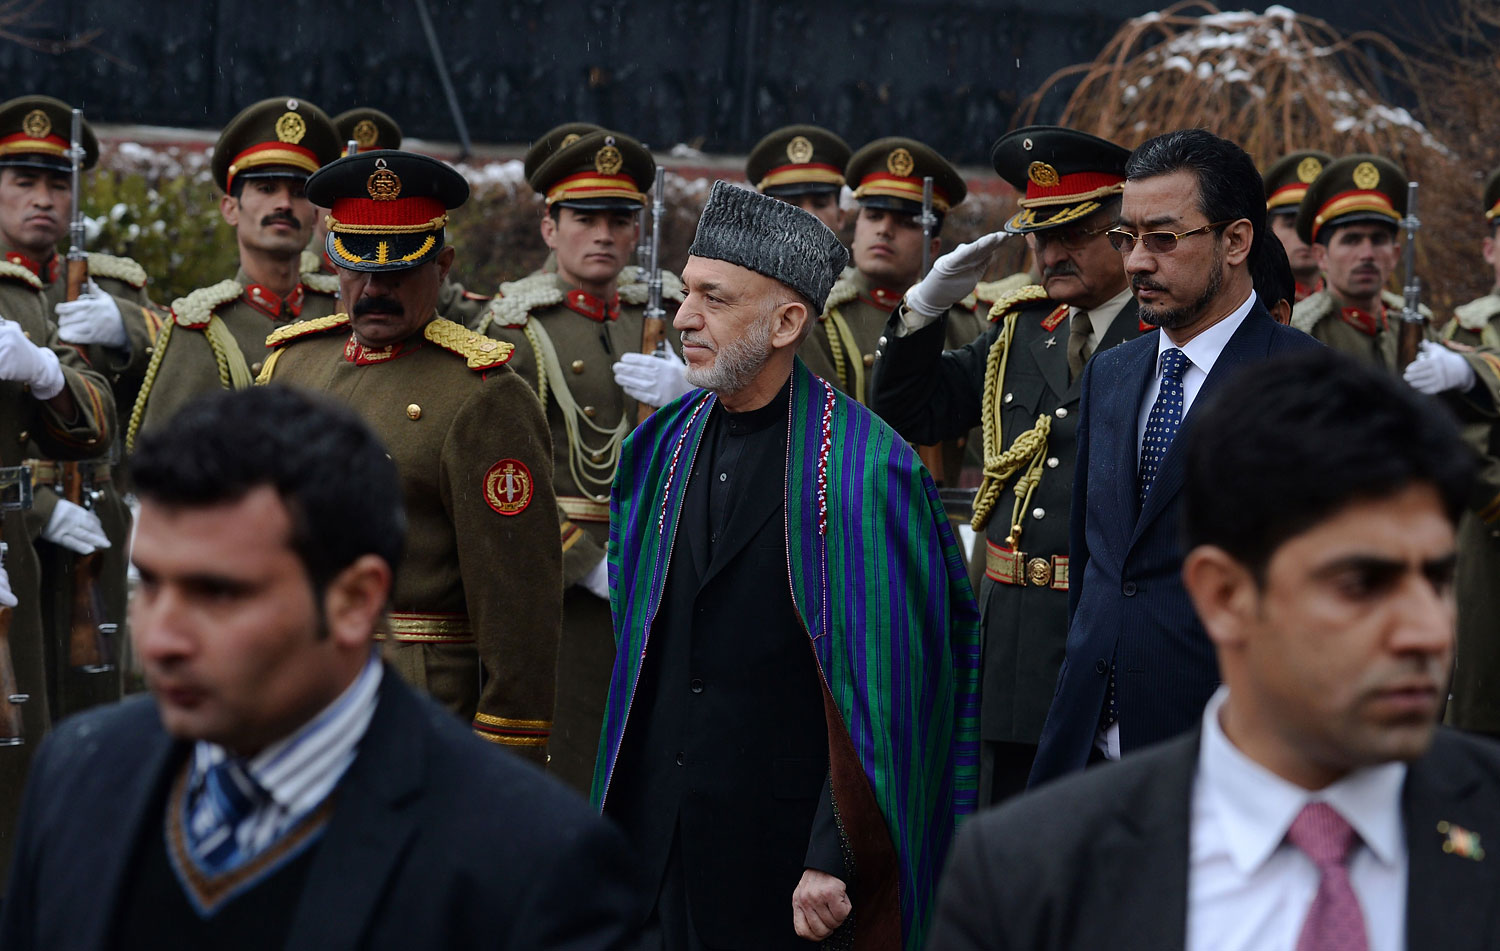 Afghan President Hamid Karzai, center, inspects a guard of honour as he arrives to deliver his final address in parliament in Kabul on March 15, 2014. (Wakil Kohsar—AFP/Getty Images)